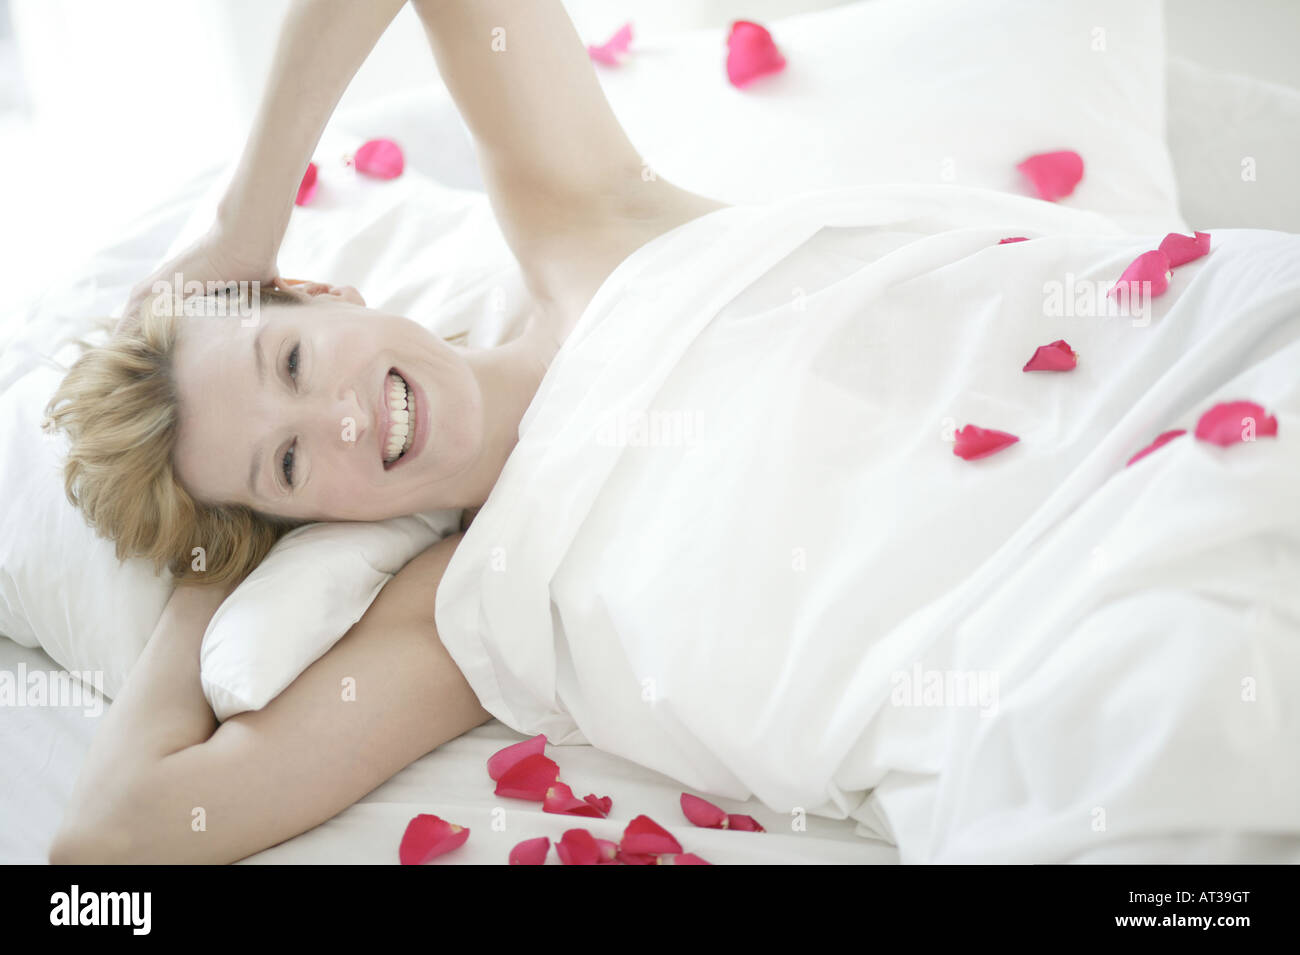 A woman lying in bed smiling, rose petals scattered on  the bed Stock Photo